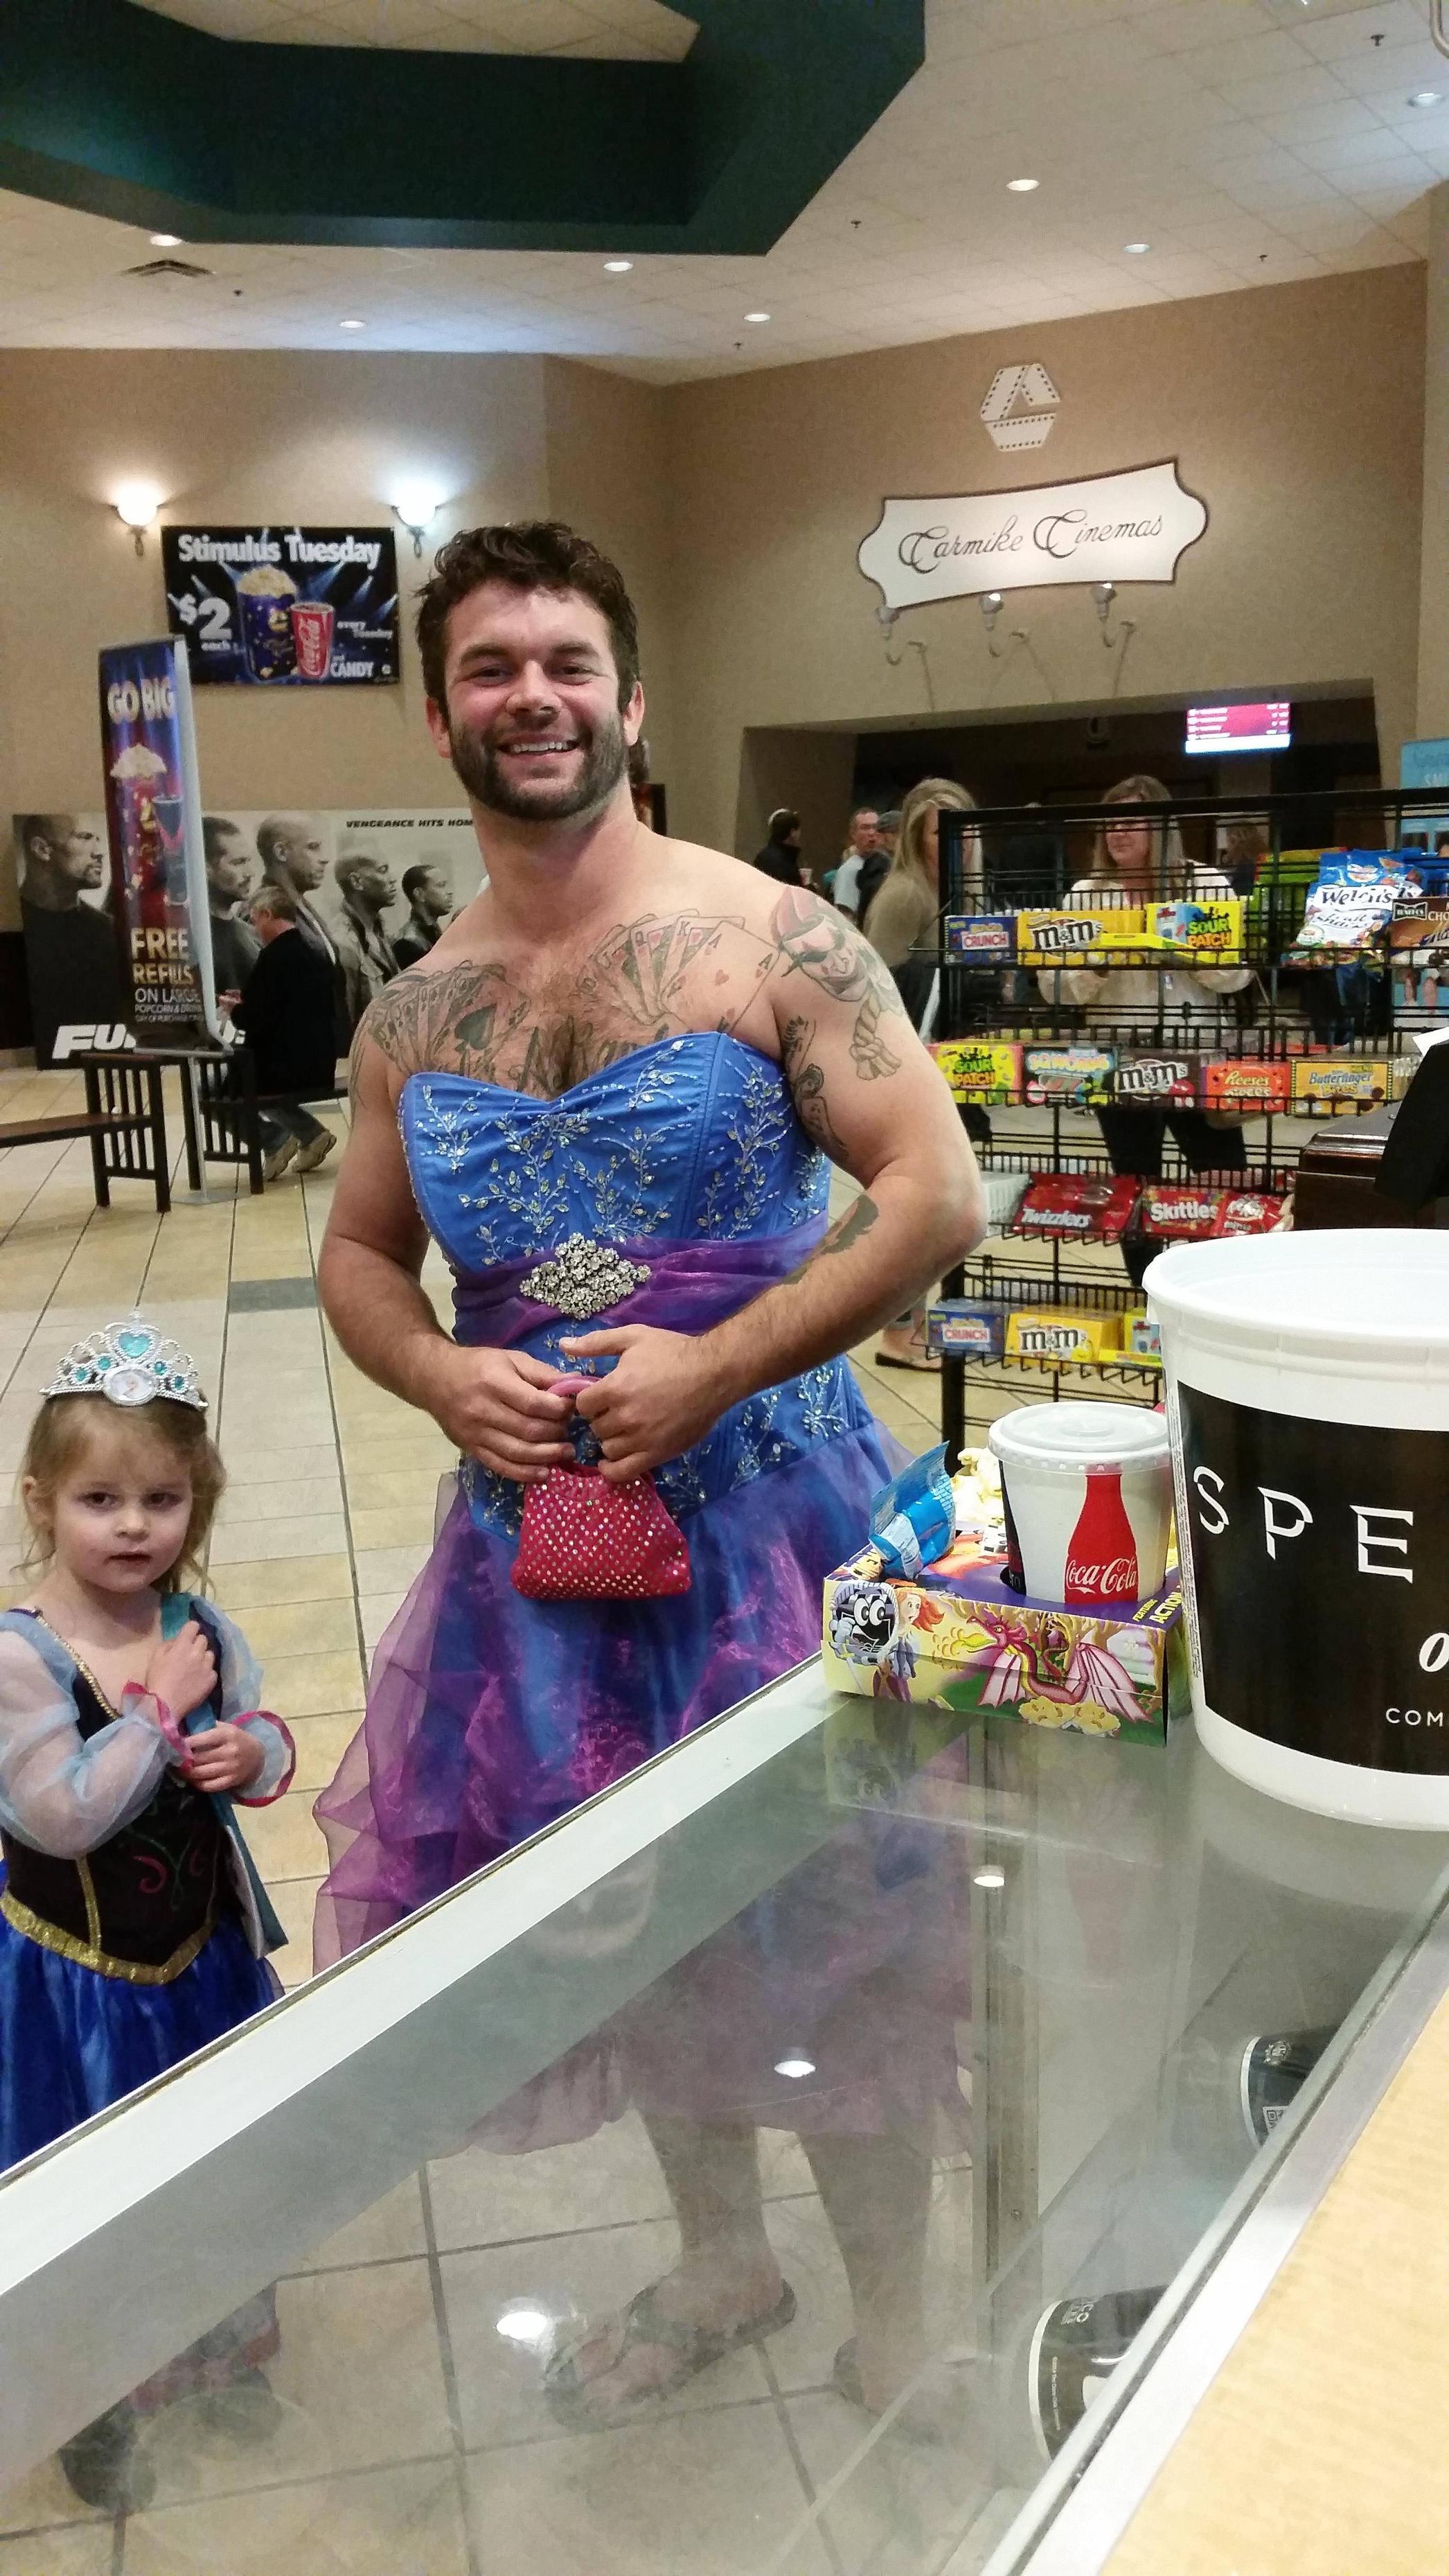 Jesse Nagy is a contender for 2015's “Uncle Of The Year” award after he wore a princess costume to a movie theater in Florence, Alabama, so that his niece wouldn’t feel so embarassed about wearing hers.